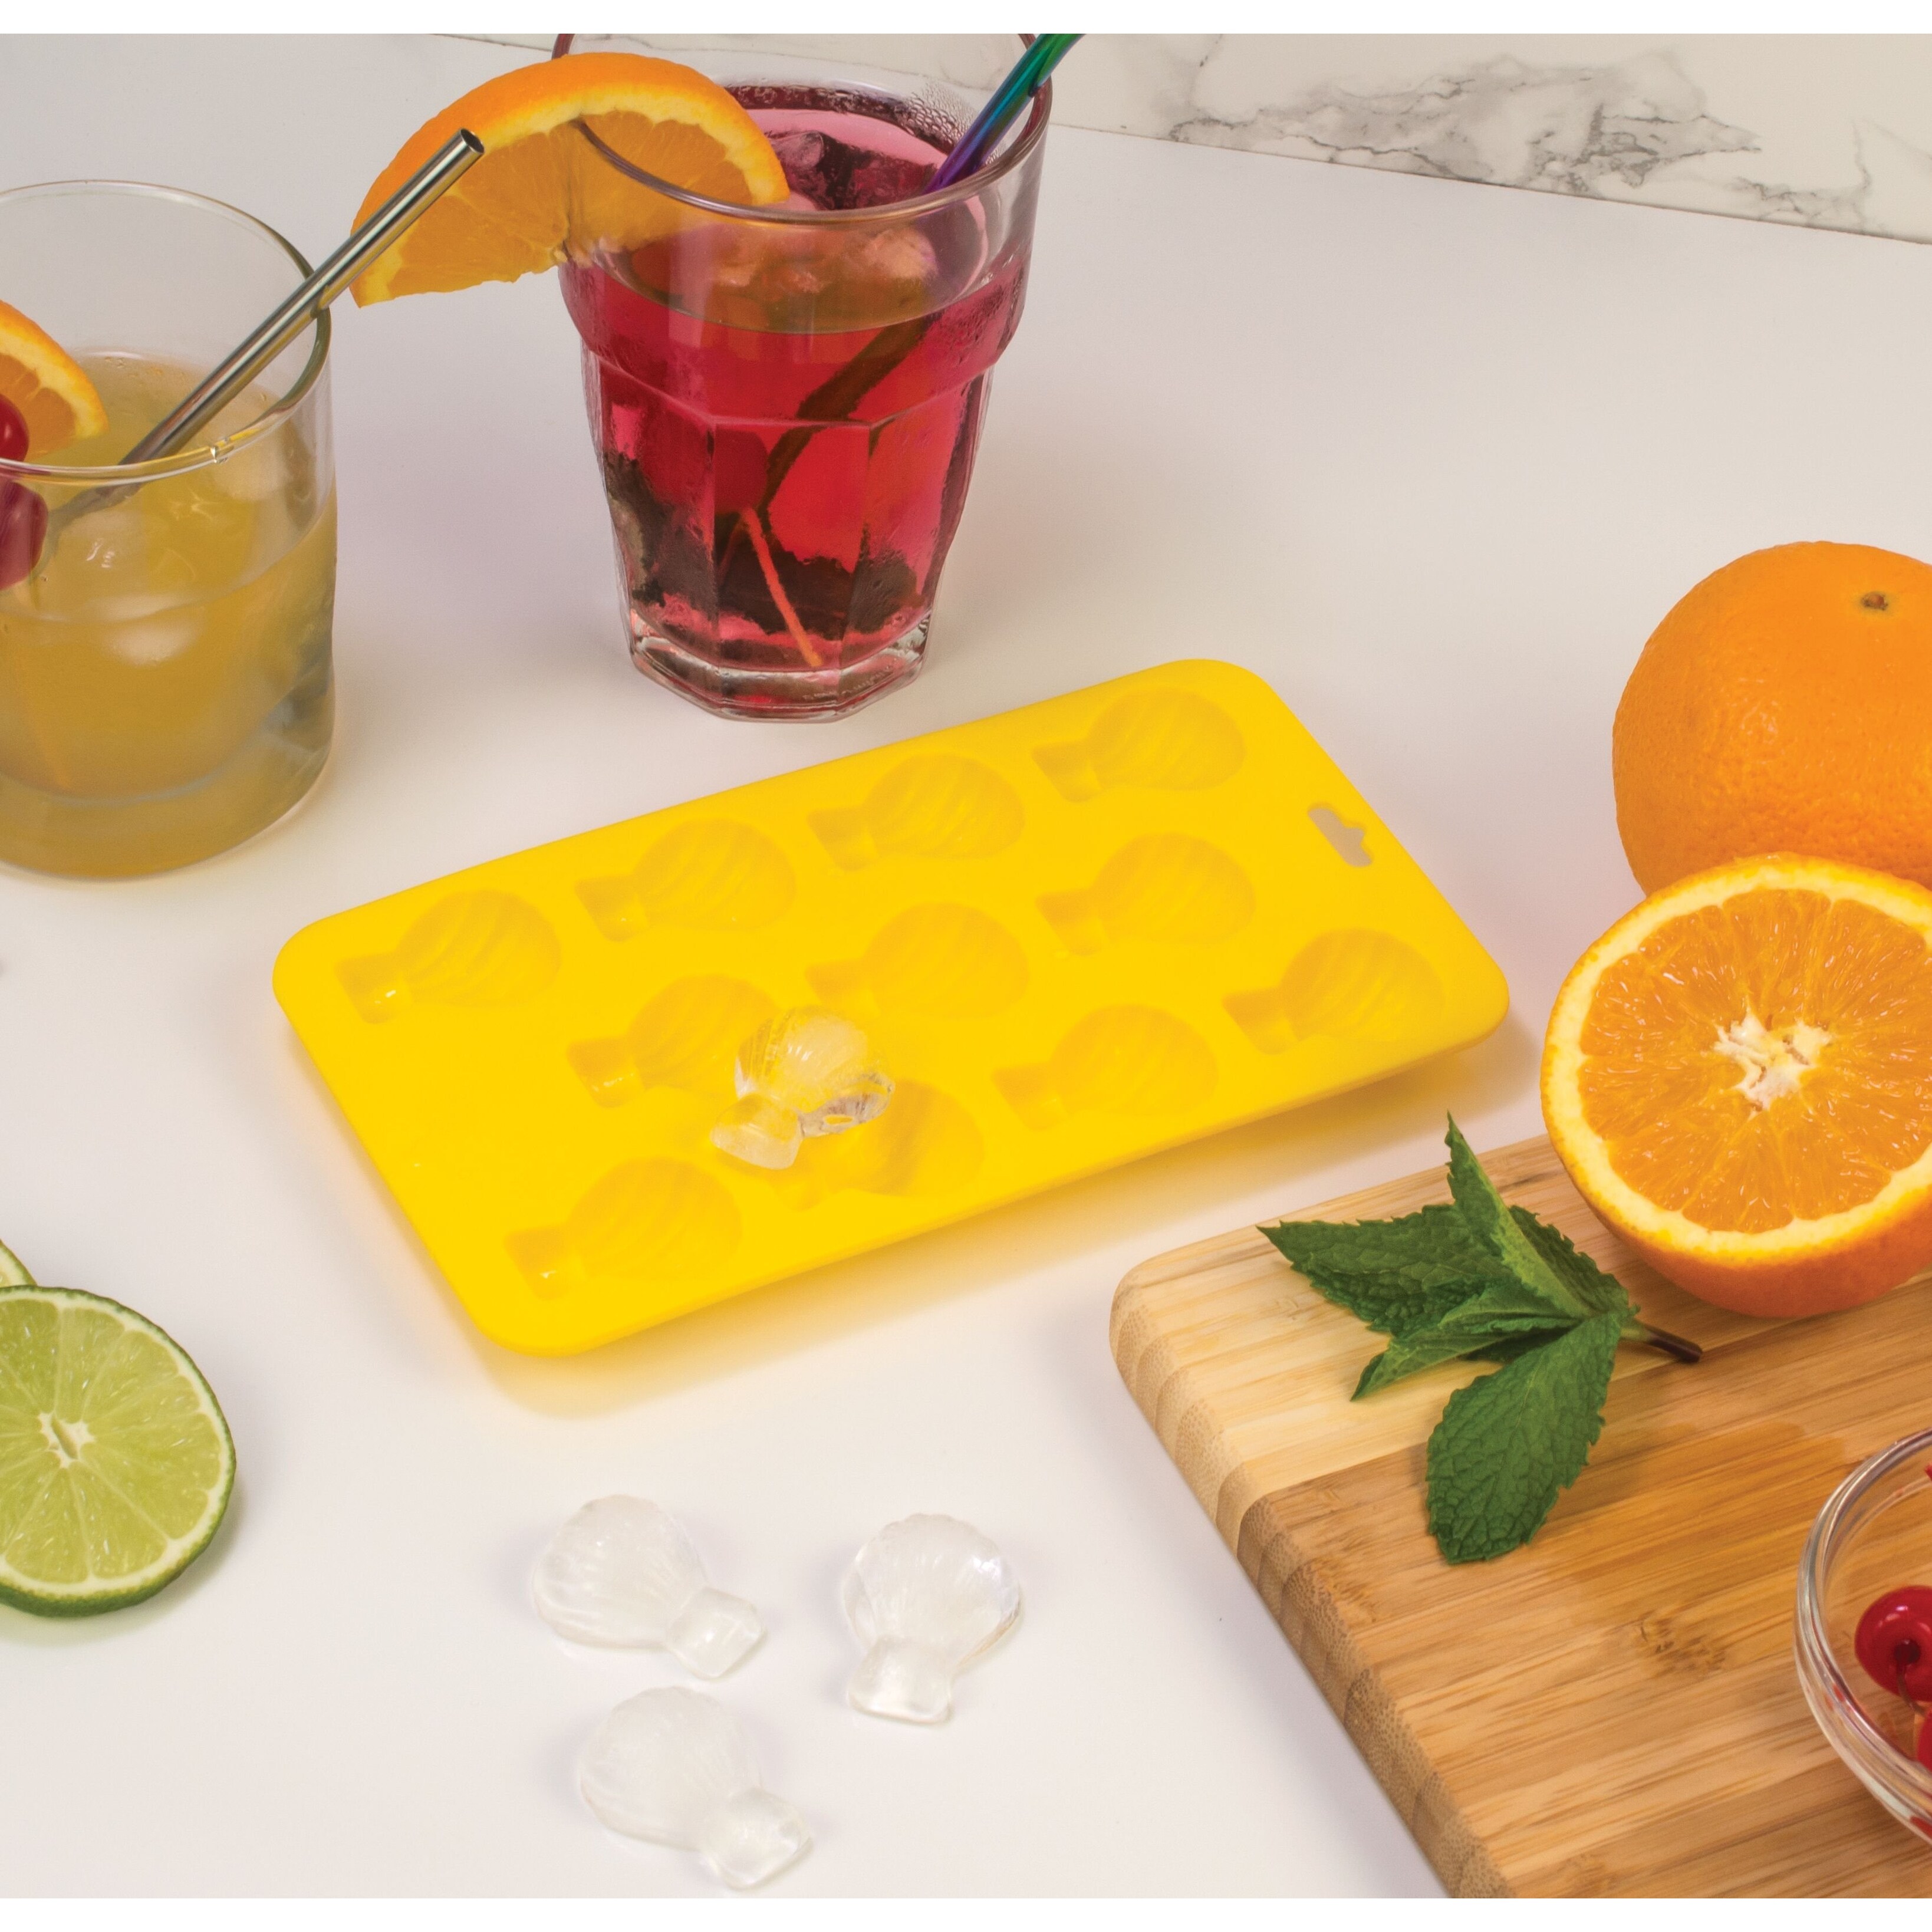 HIC Yellow Silicone Shell Shape Ice Cube Tray and Baking Mold